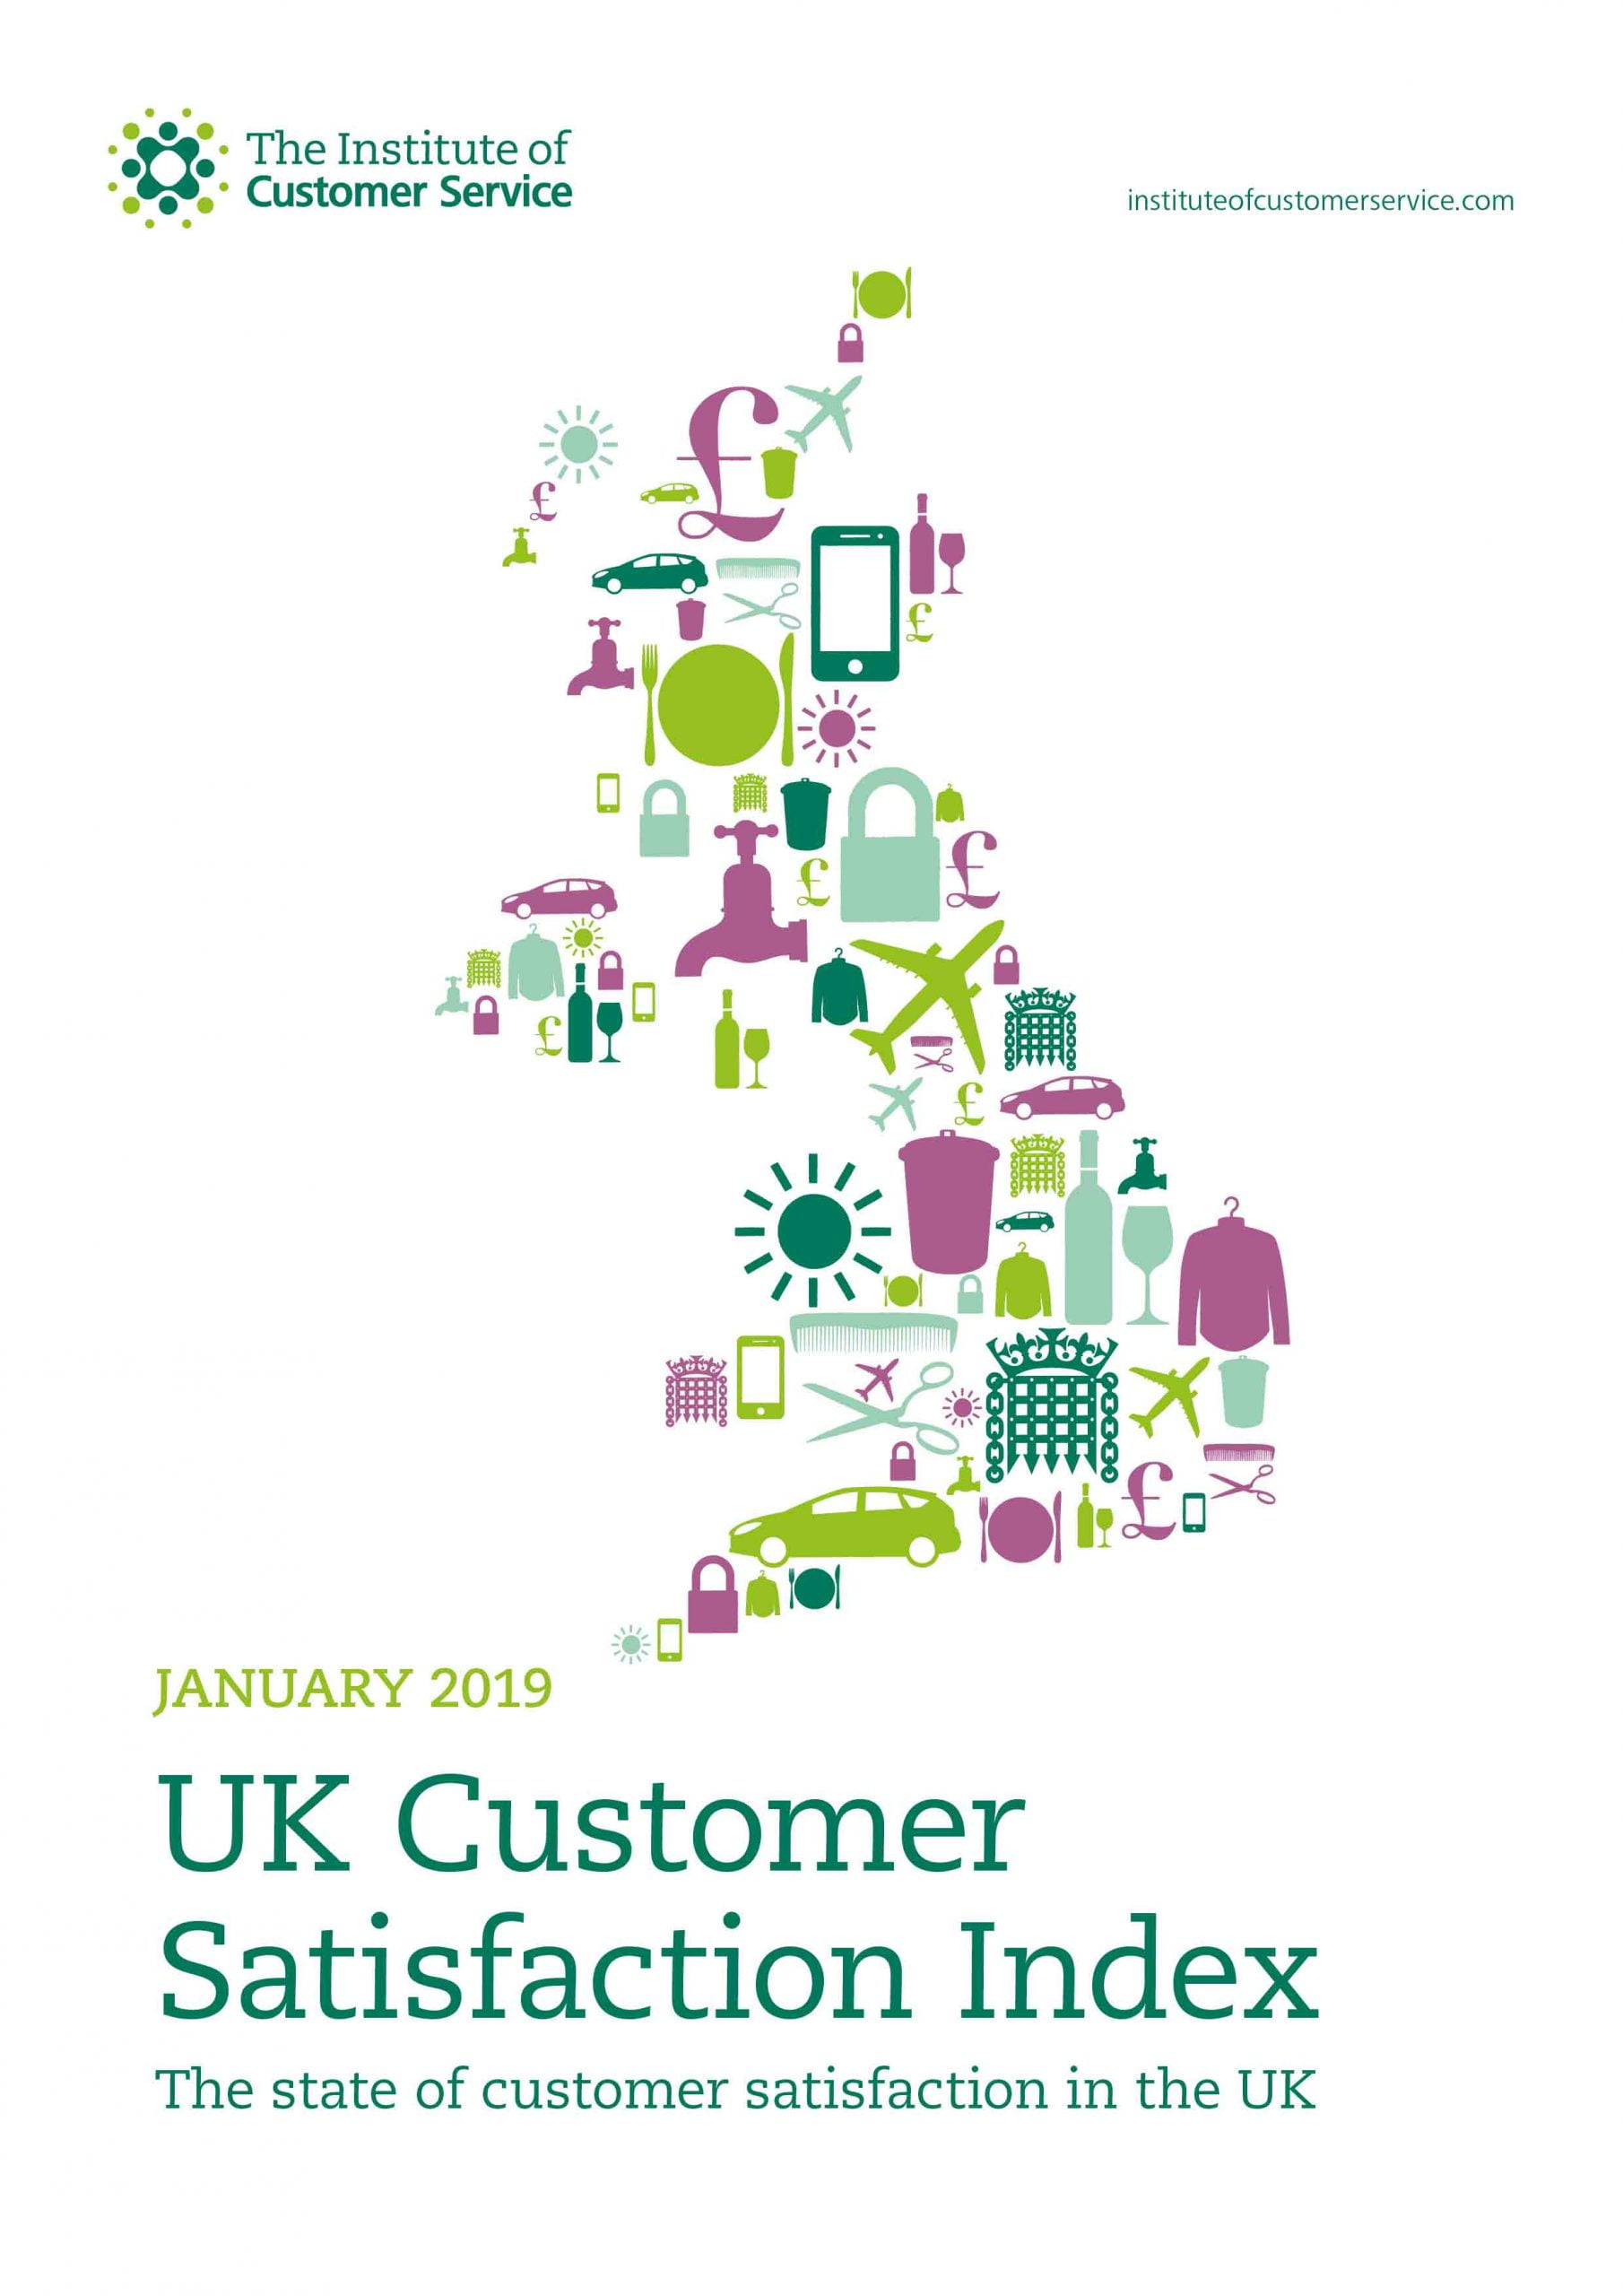 UKCSI: The state of customer satisfaction in the UK – January 2019